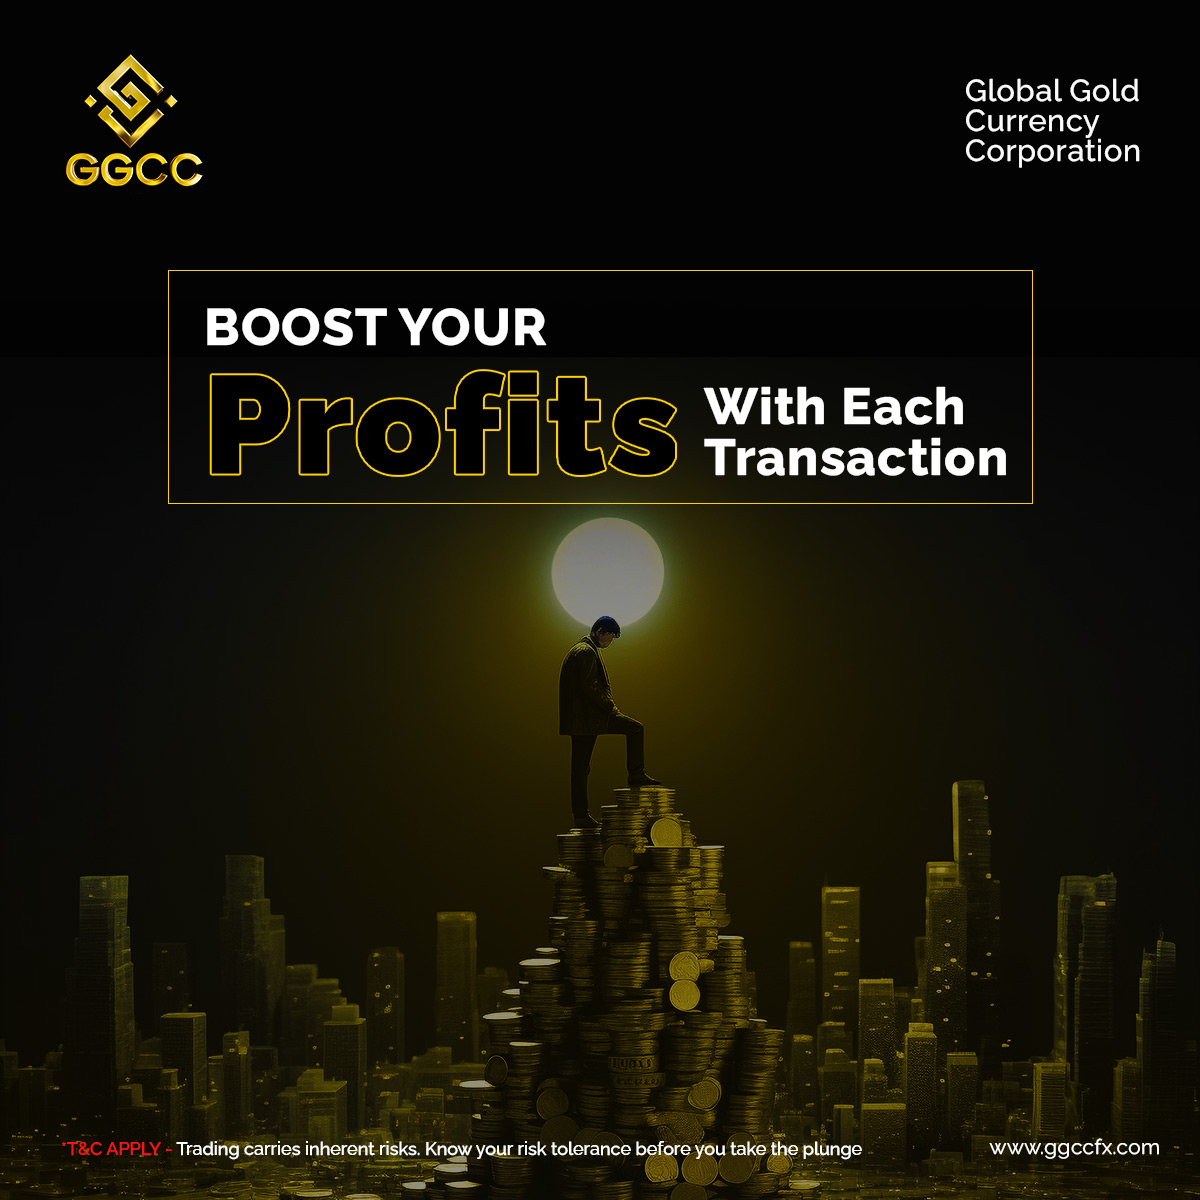 Elevate your financial game with every transaction where each move is a step towards boosting your profits!

#BoostYourProfits #StrategicTrading #FinancialSuccess #TradeSmart #FinancialSuccess #GGCCfx
#StrategicTrading #ProfitsOnTheRise